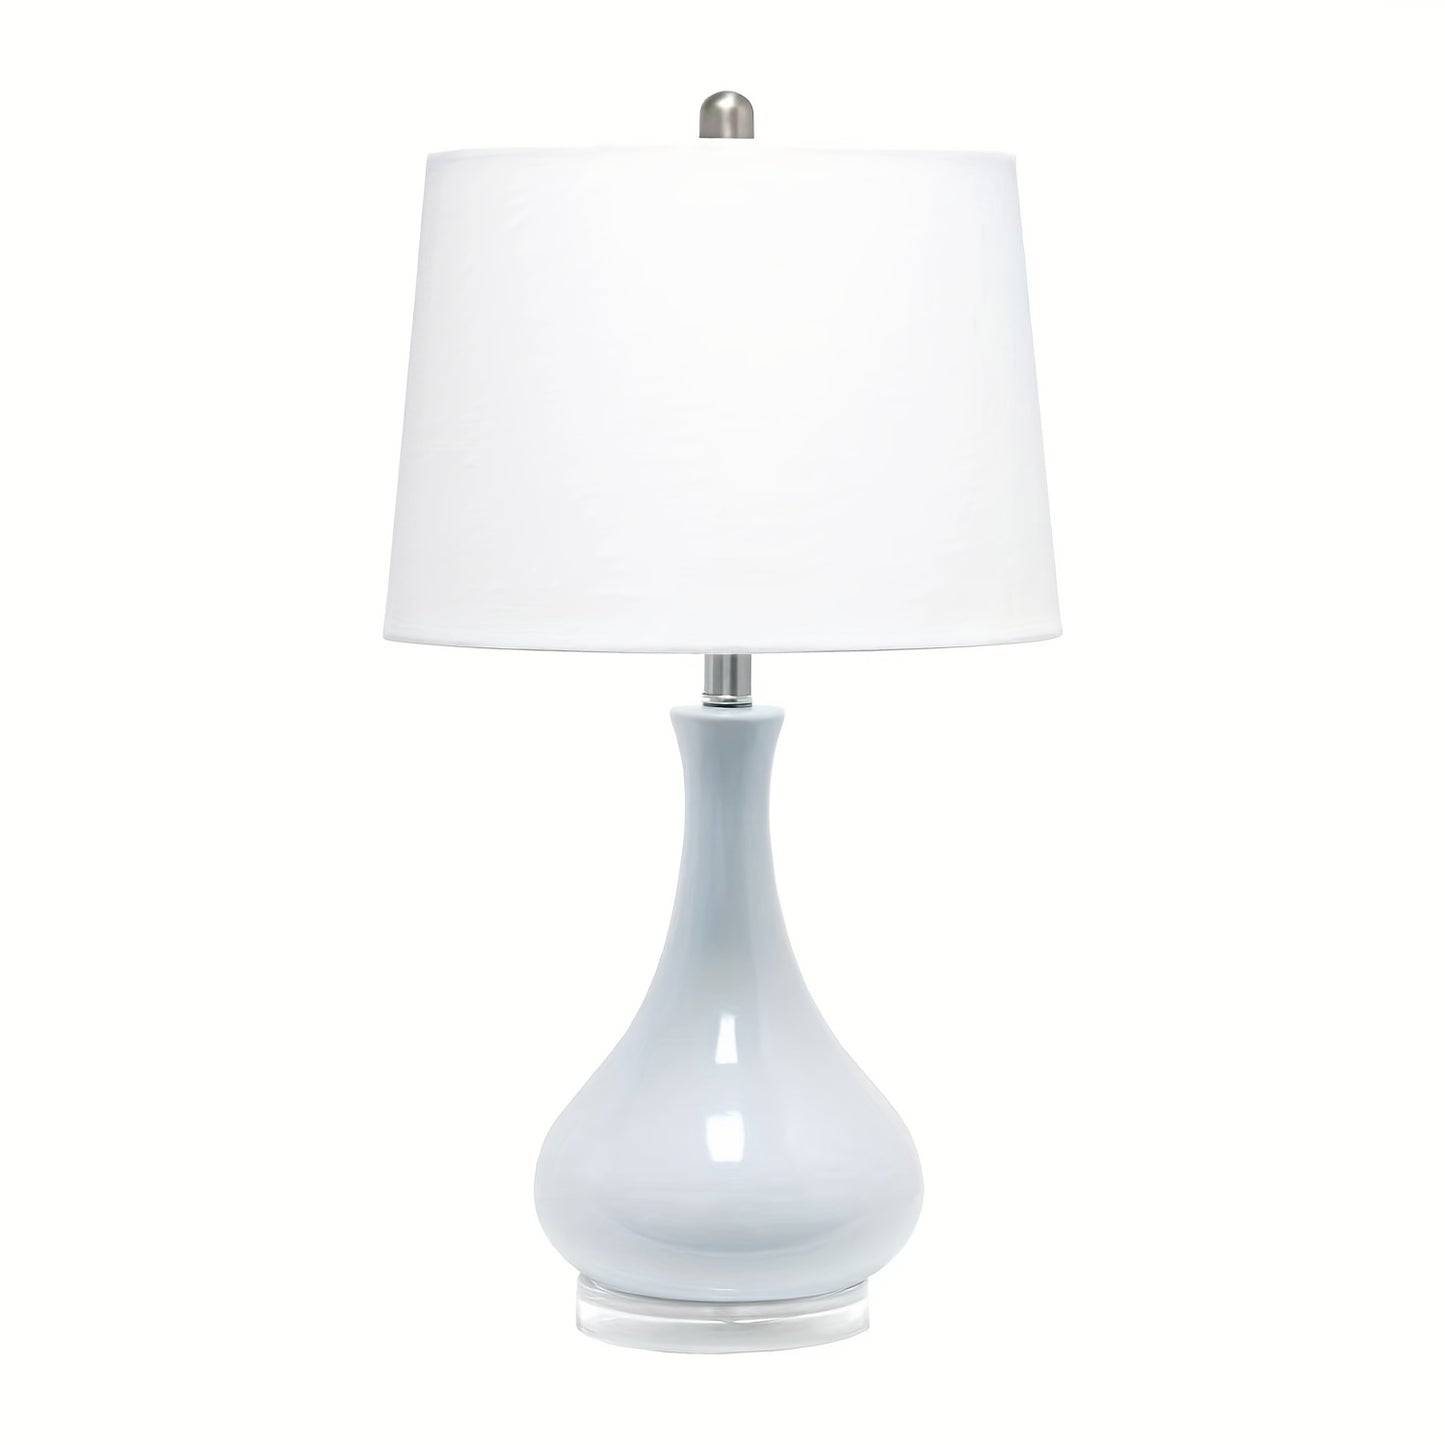 Porcelain Table Lamp with Off-White Linen Lampshade, Ceramic Vase Base, 14 x 24.6 Inch, 5 Colors